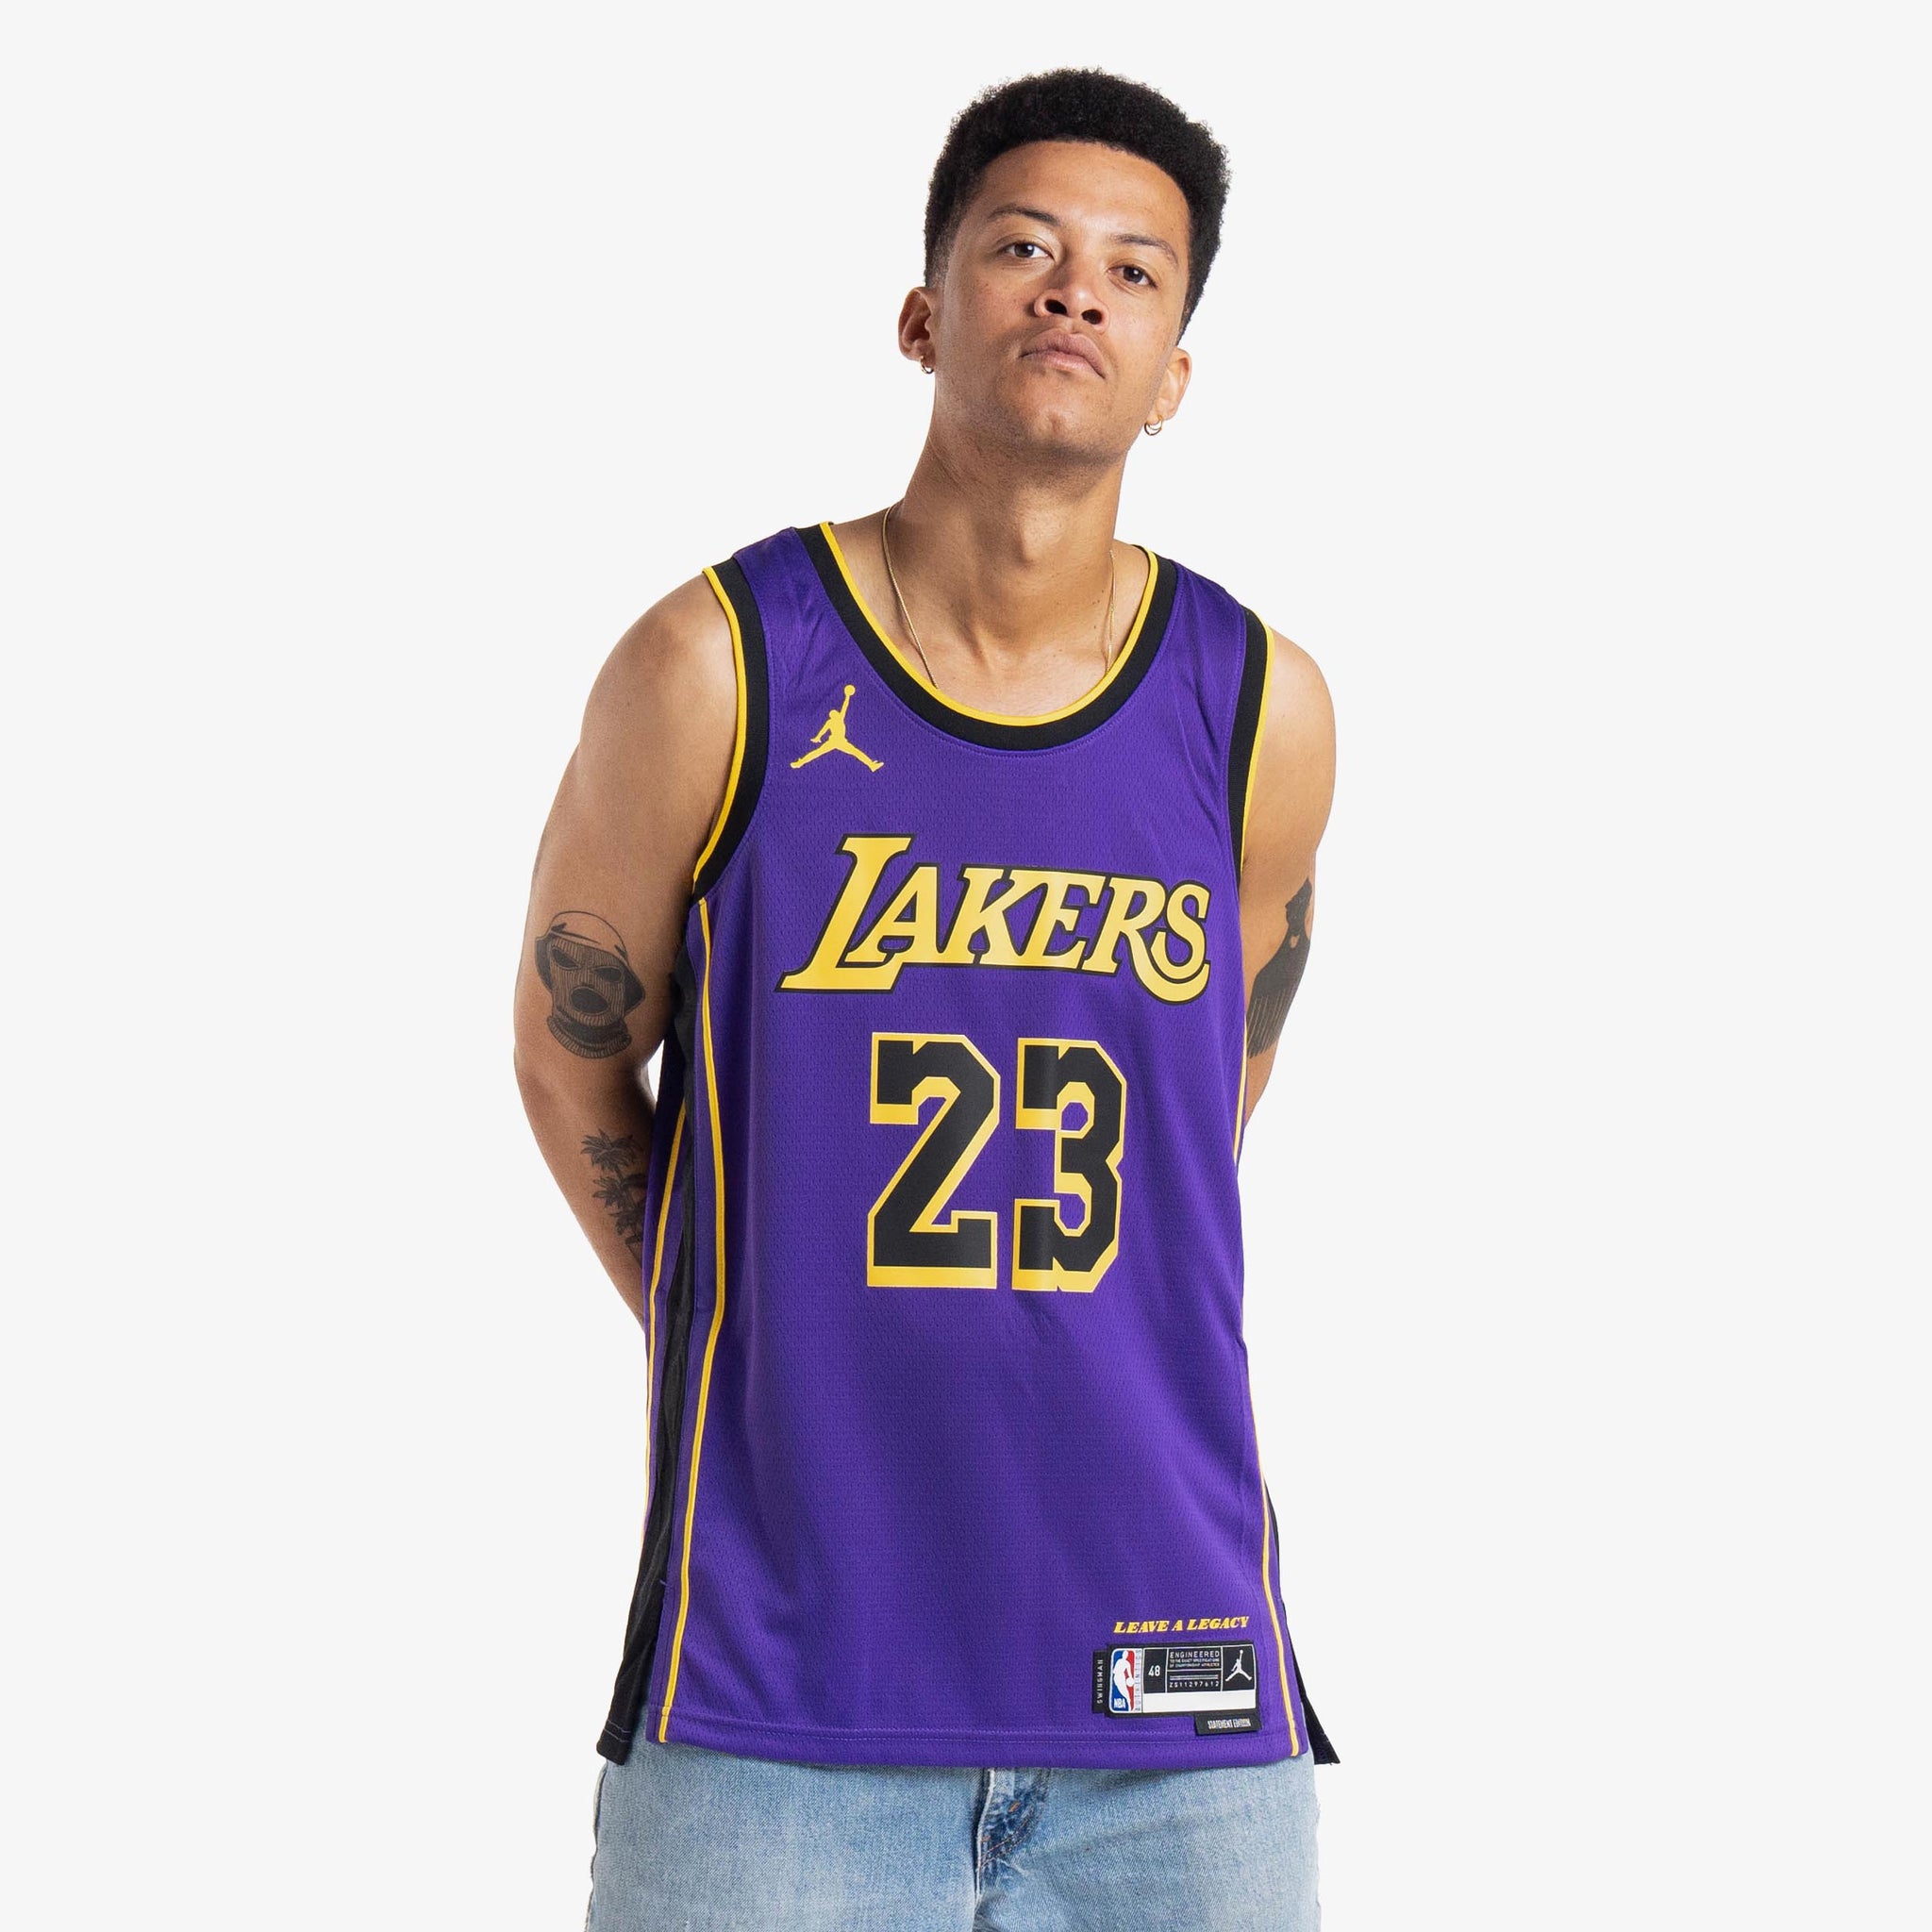 Buy NBA LOS ANGELES LAKERS DRI-FIT STATEMENT SWINGMAN JERSEY LEBRON JAMES  for N/A 0.0 on !